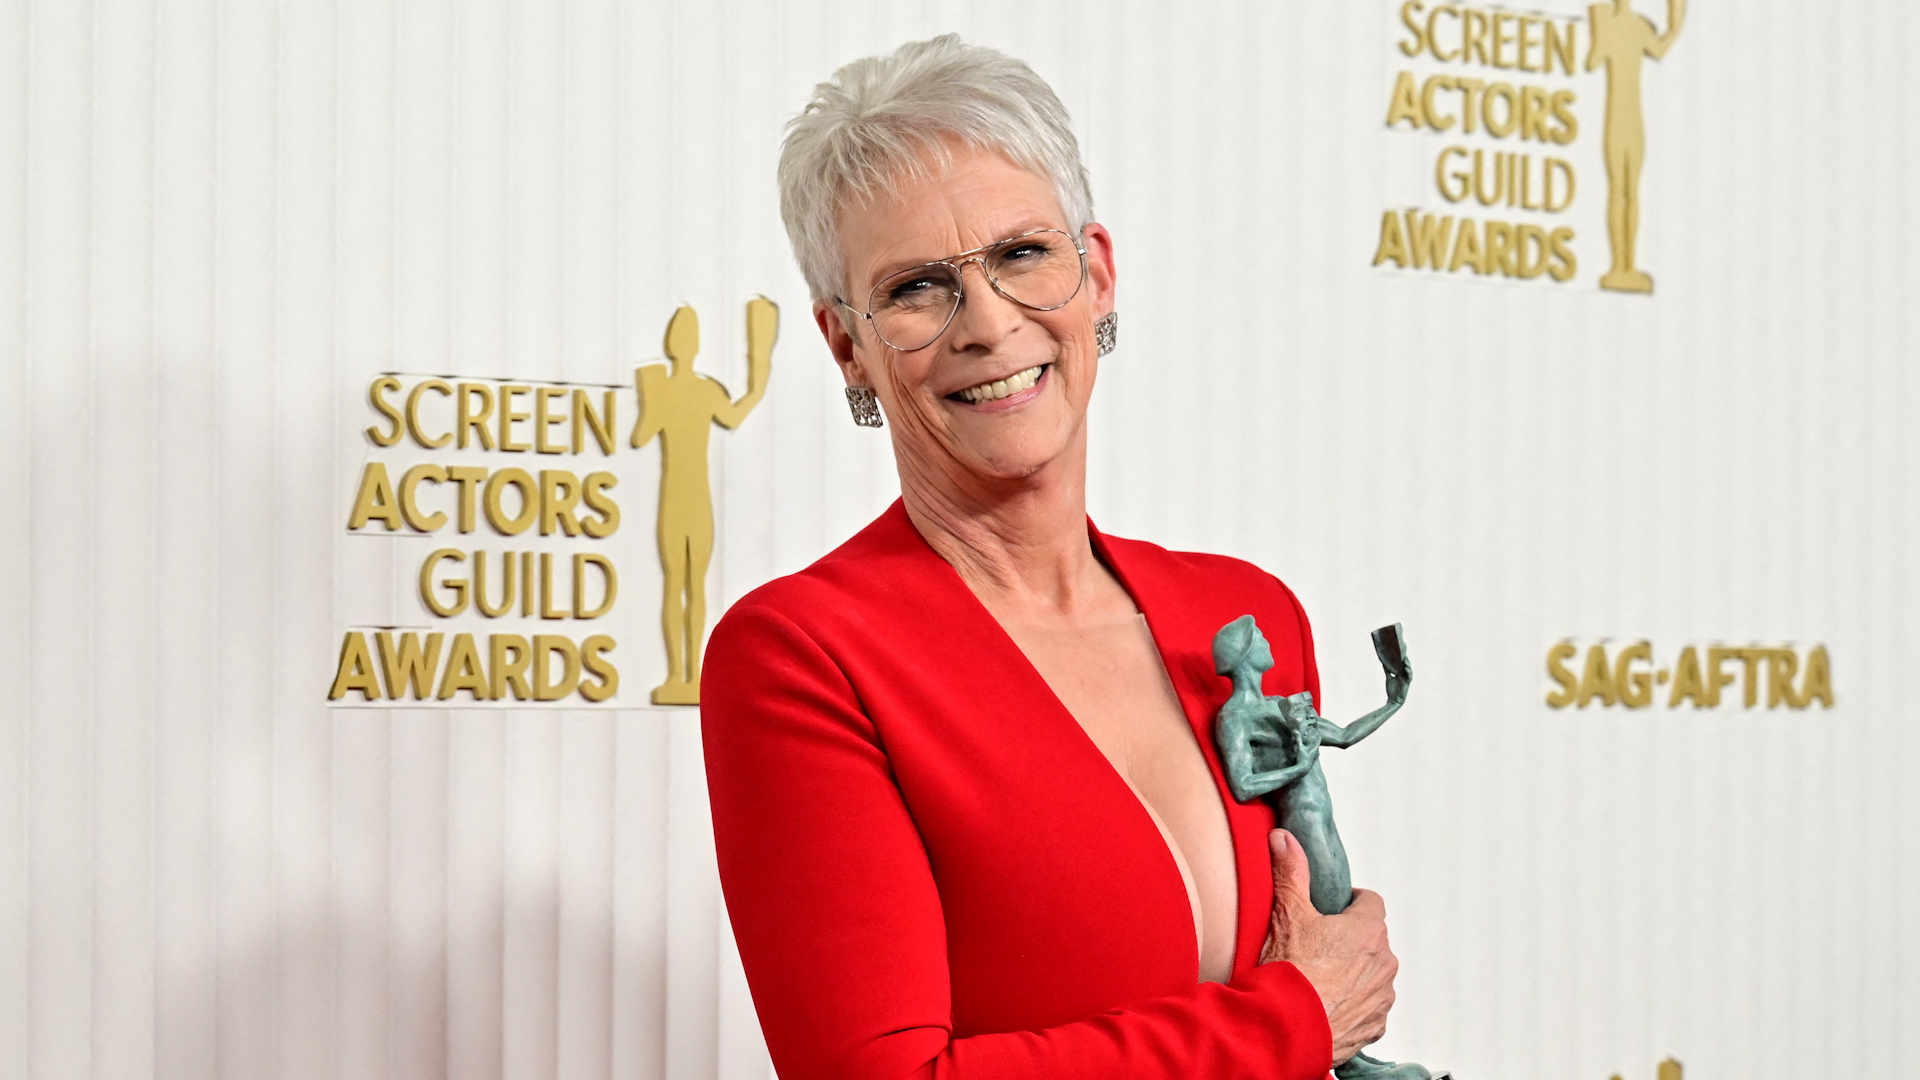 Video: SAG Awards 2023 includes Jamie Lee Curtis calling herself 'nepo  baby' in acceptance speech - CNN Video